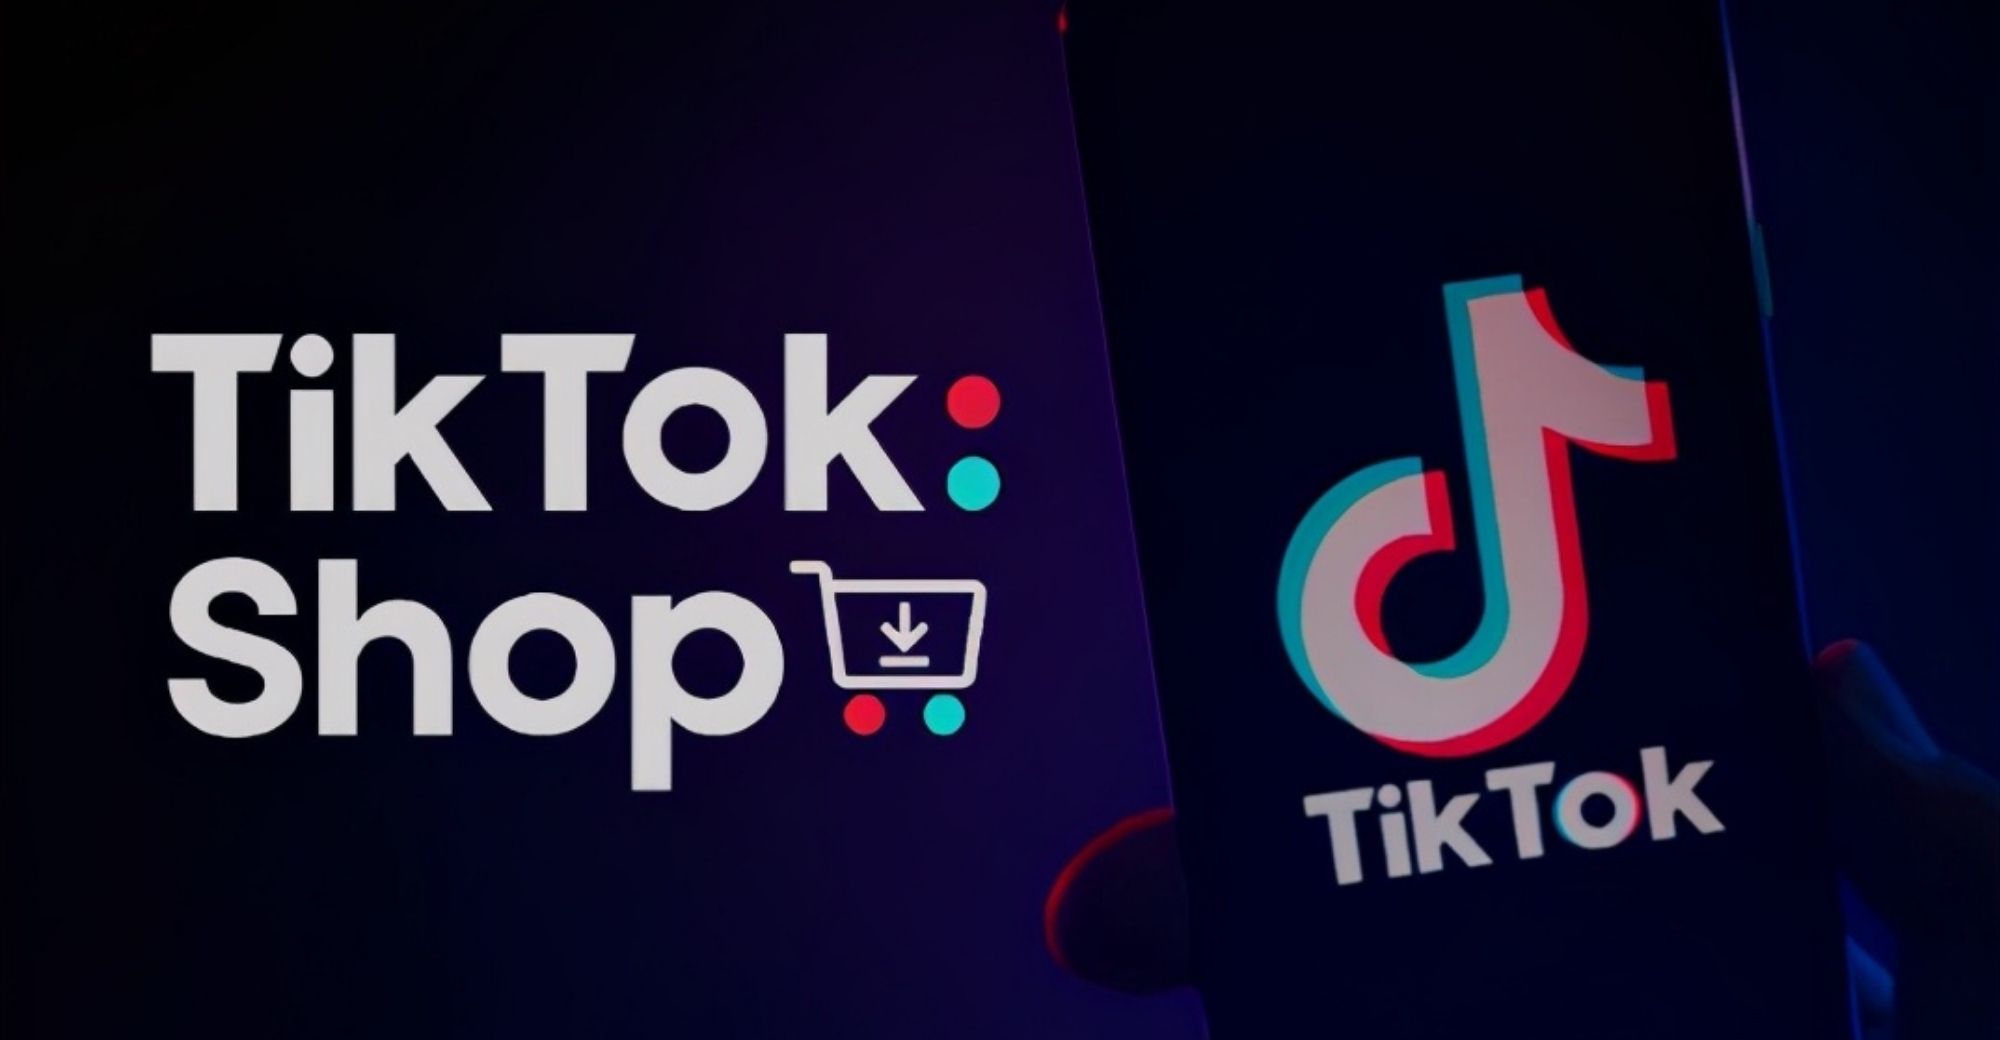 TikTok launches online shopping in the US